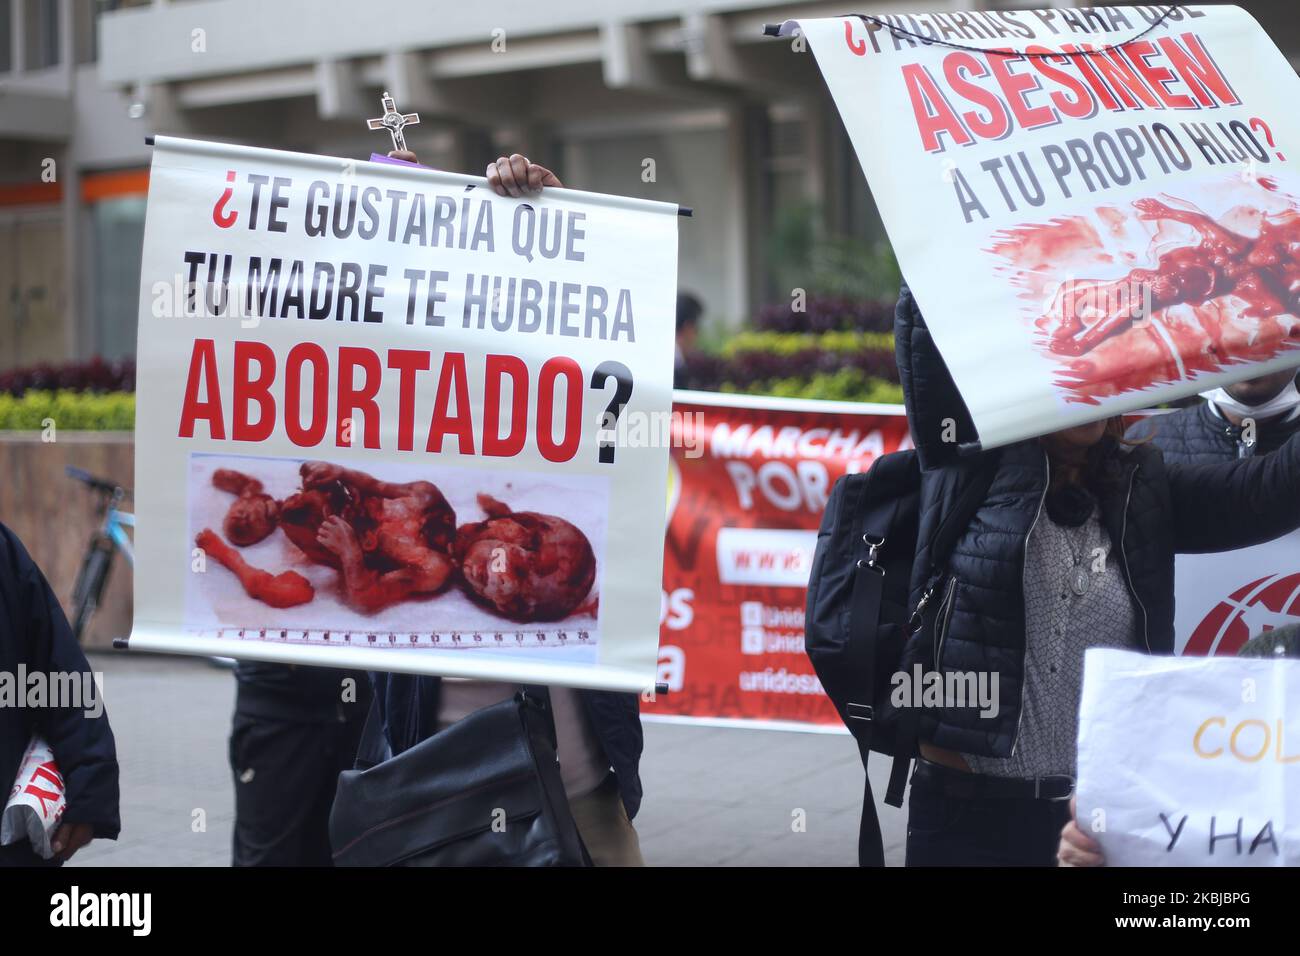 Anti-abortion activists protest in front of Colombia's Constitutional Court in Bogota city, Colombia, on March 2, 2020. Protests occurred during the debate due to the proposal of a magistrate to decriminalize abortion in the first 16 weeks of gestation and for 2 lawsuits that were requested to completely penalize this procedure. (Photo by Daniel Garzon Herazo/NurPhoto) Stock Photo